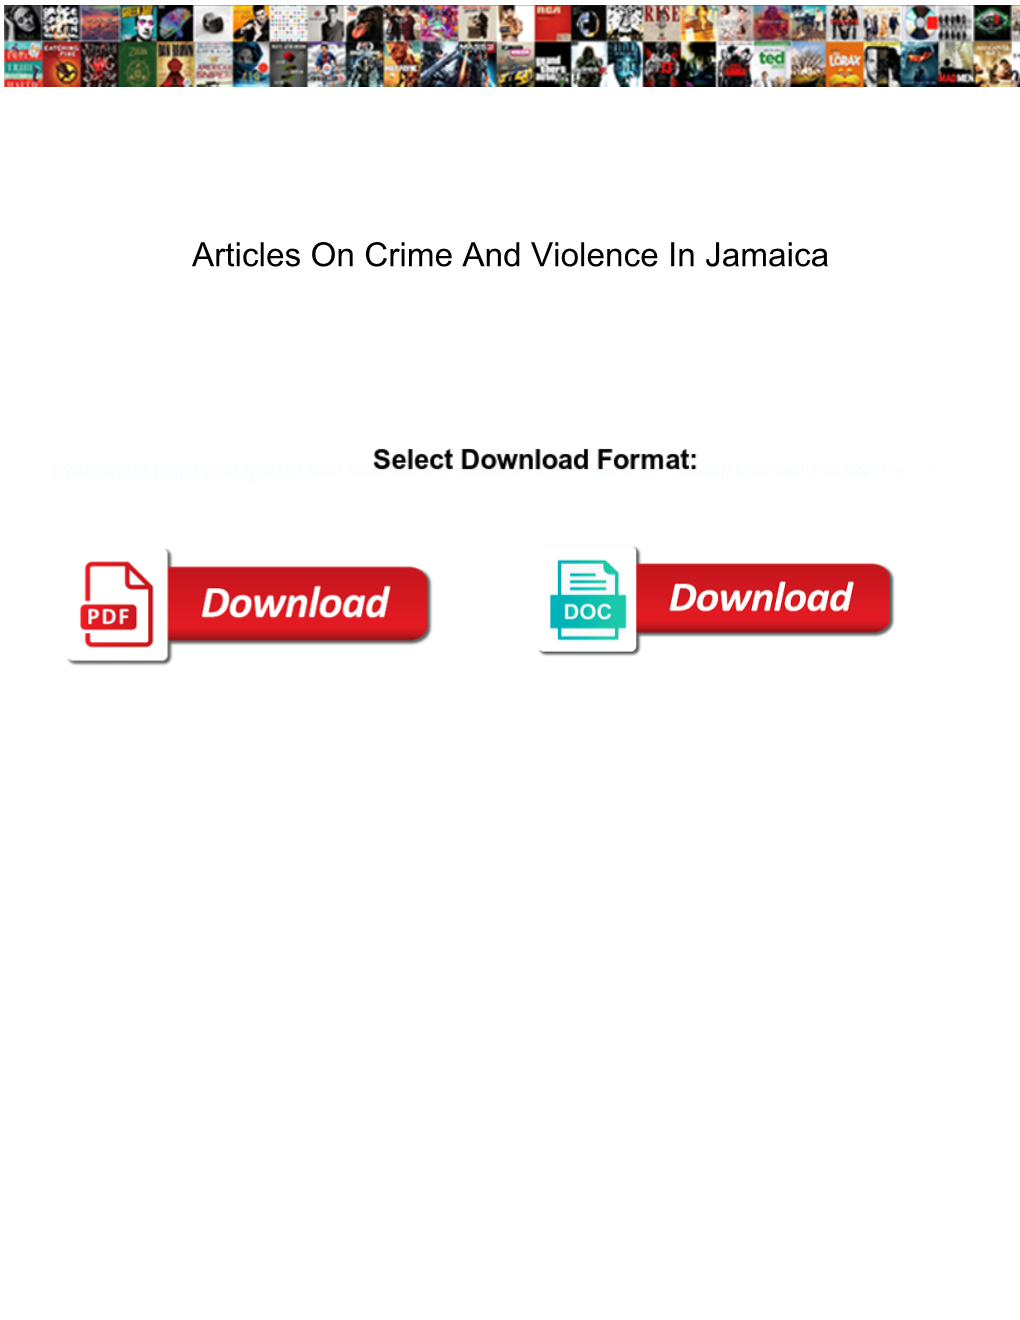 Articles on Crime and Violence in Jamaica